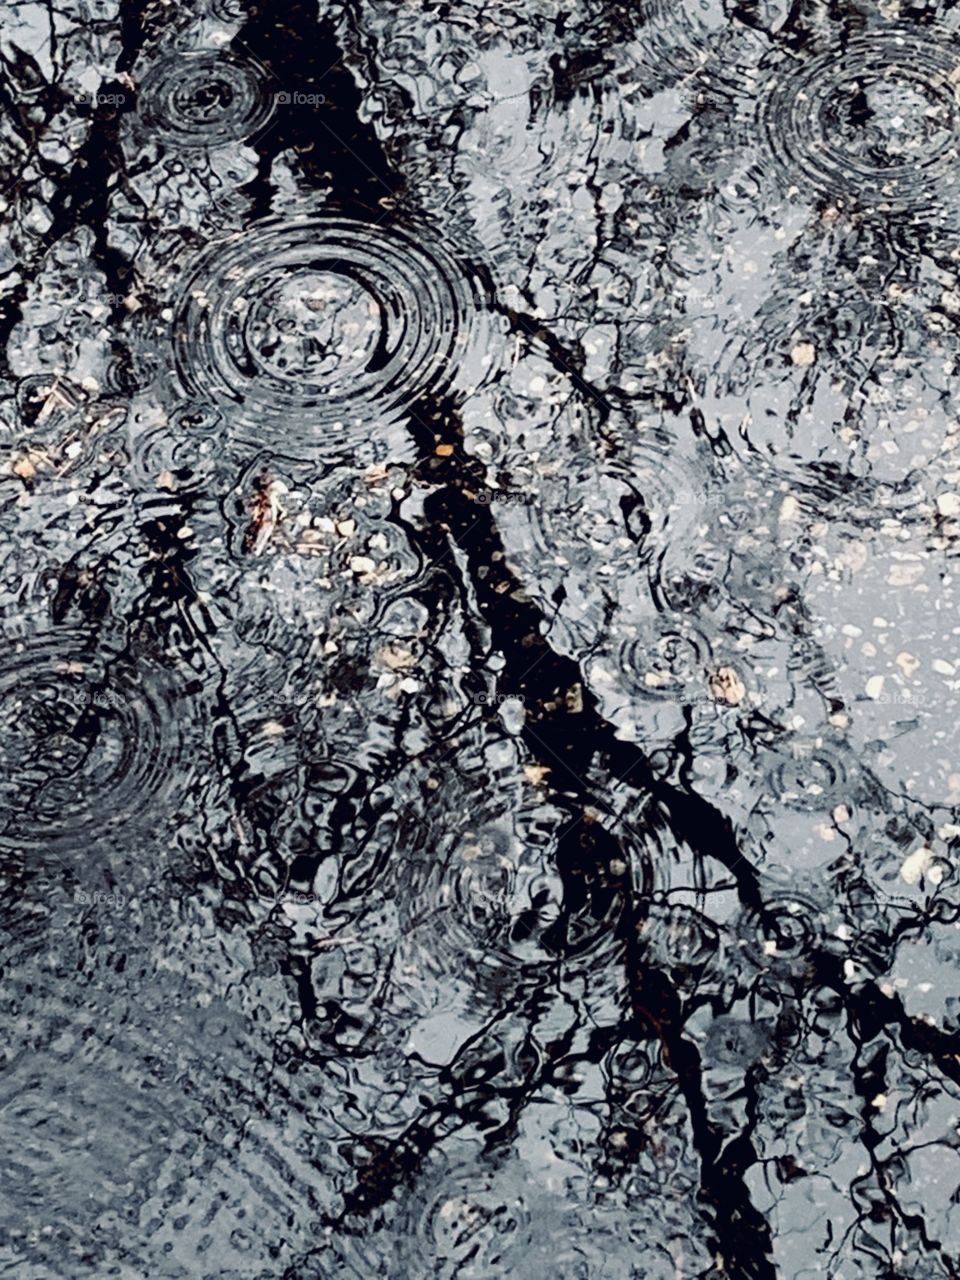 ripples on a reflection of a tree on a rainy day